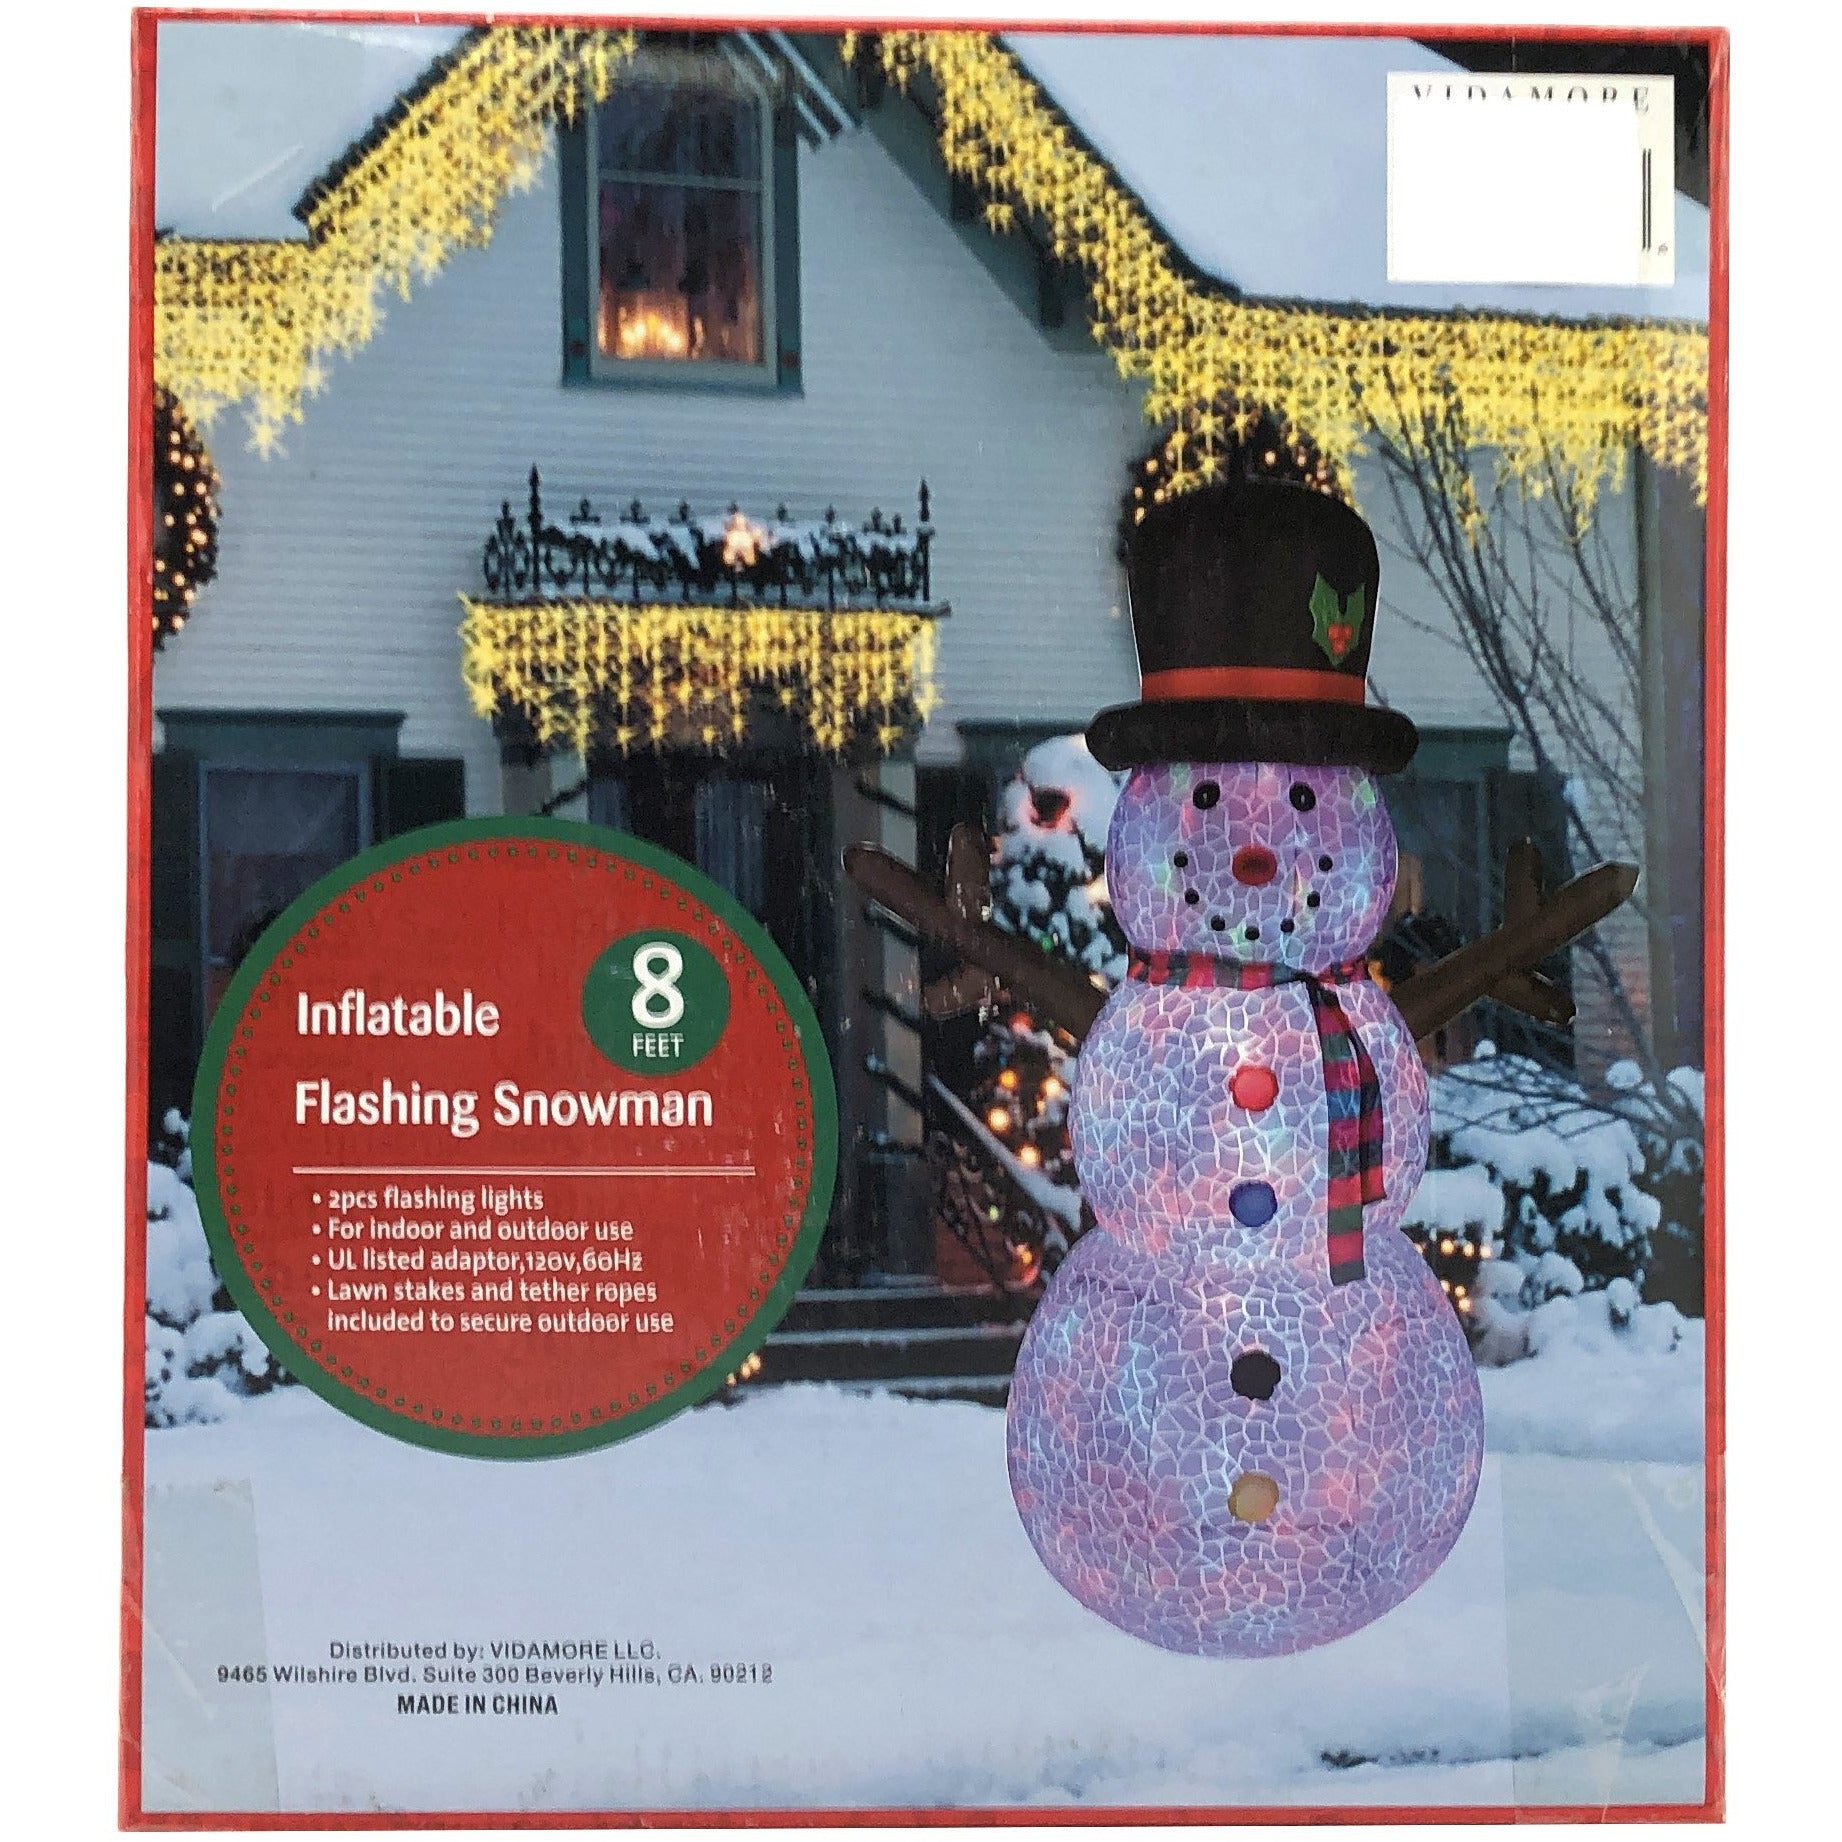 8 Foot Inflatible Snowman with Flashing light set inside for front yard christmas deocration